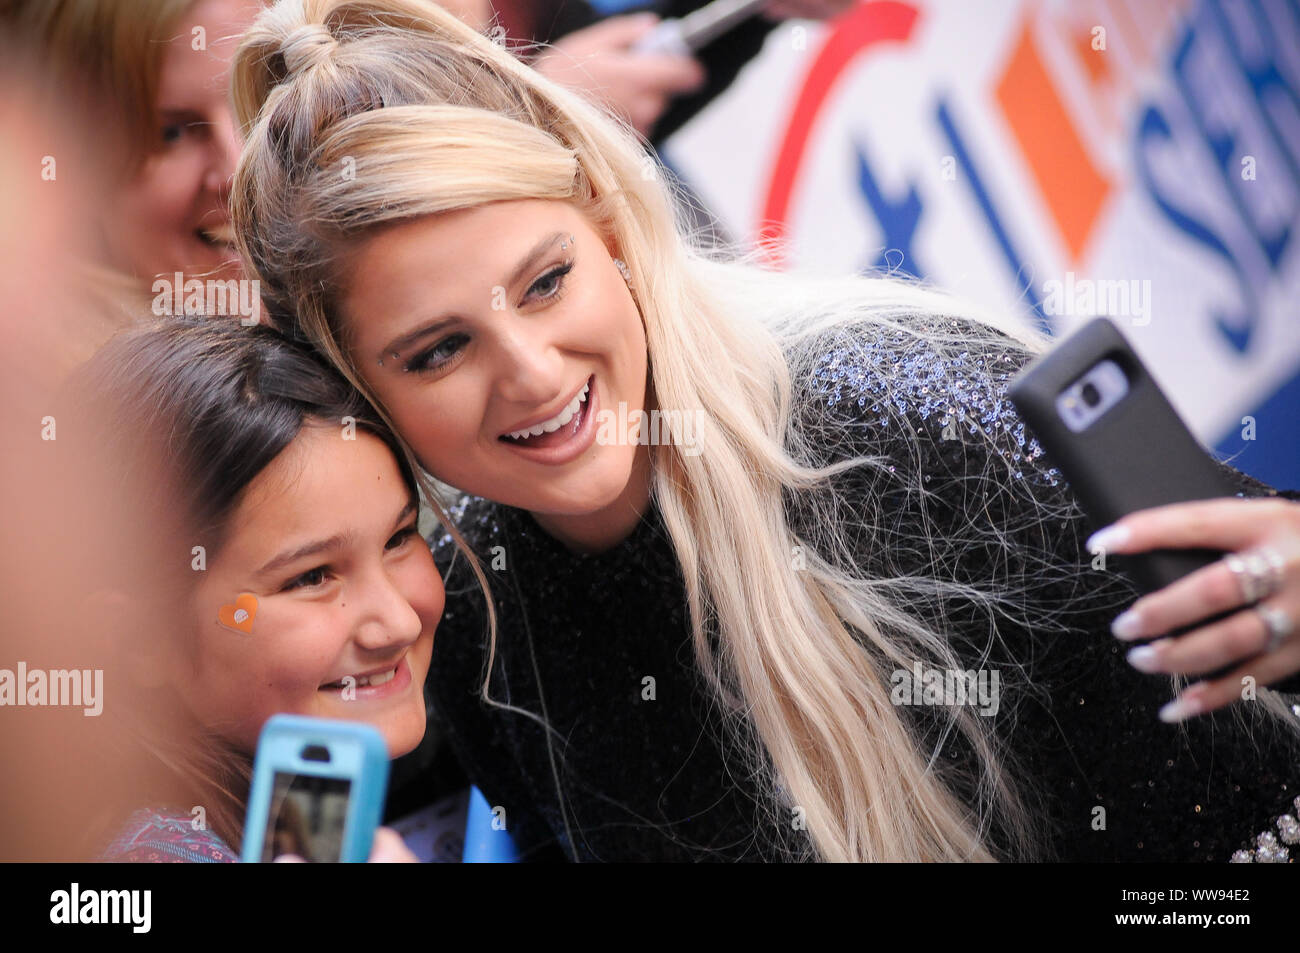 New York, United States. 13th Sep, 2019. Meghan Trainor takes photos with fans at Rockefeller Center in New York City. Credit: SOPA Images Limited/Alamy Live News Stock Photo